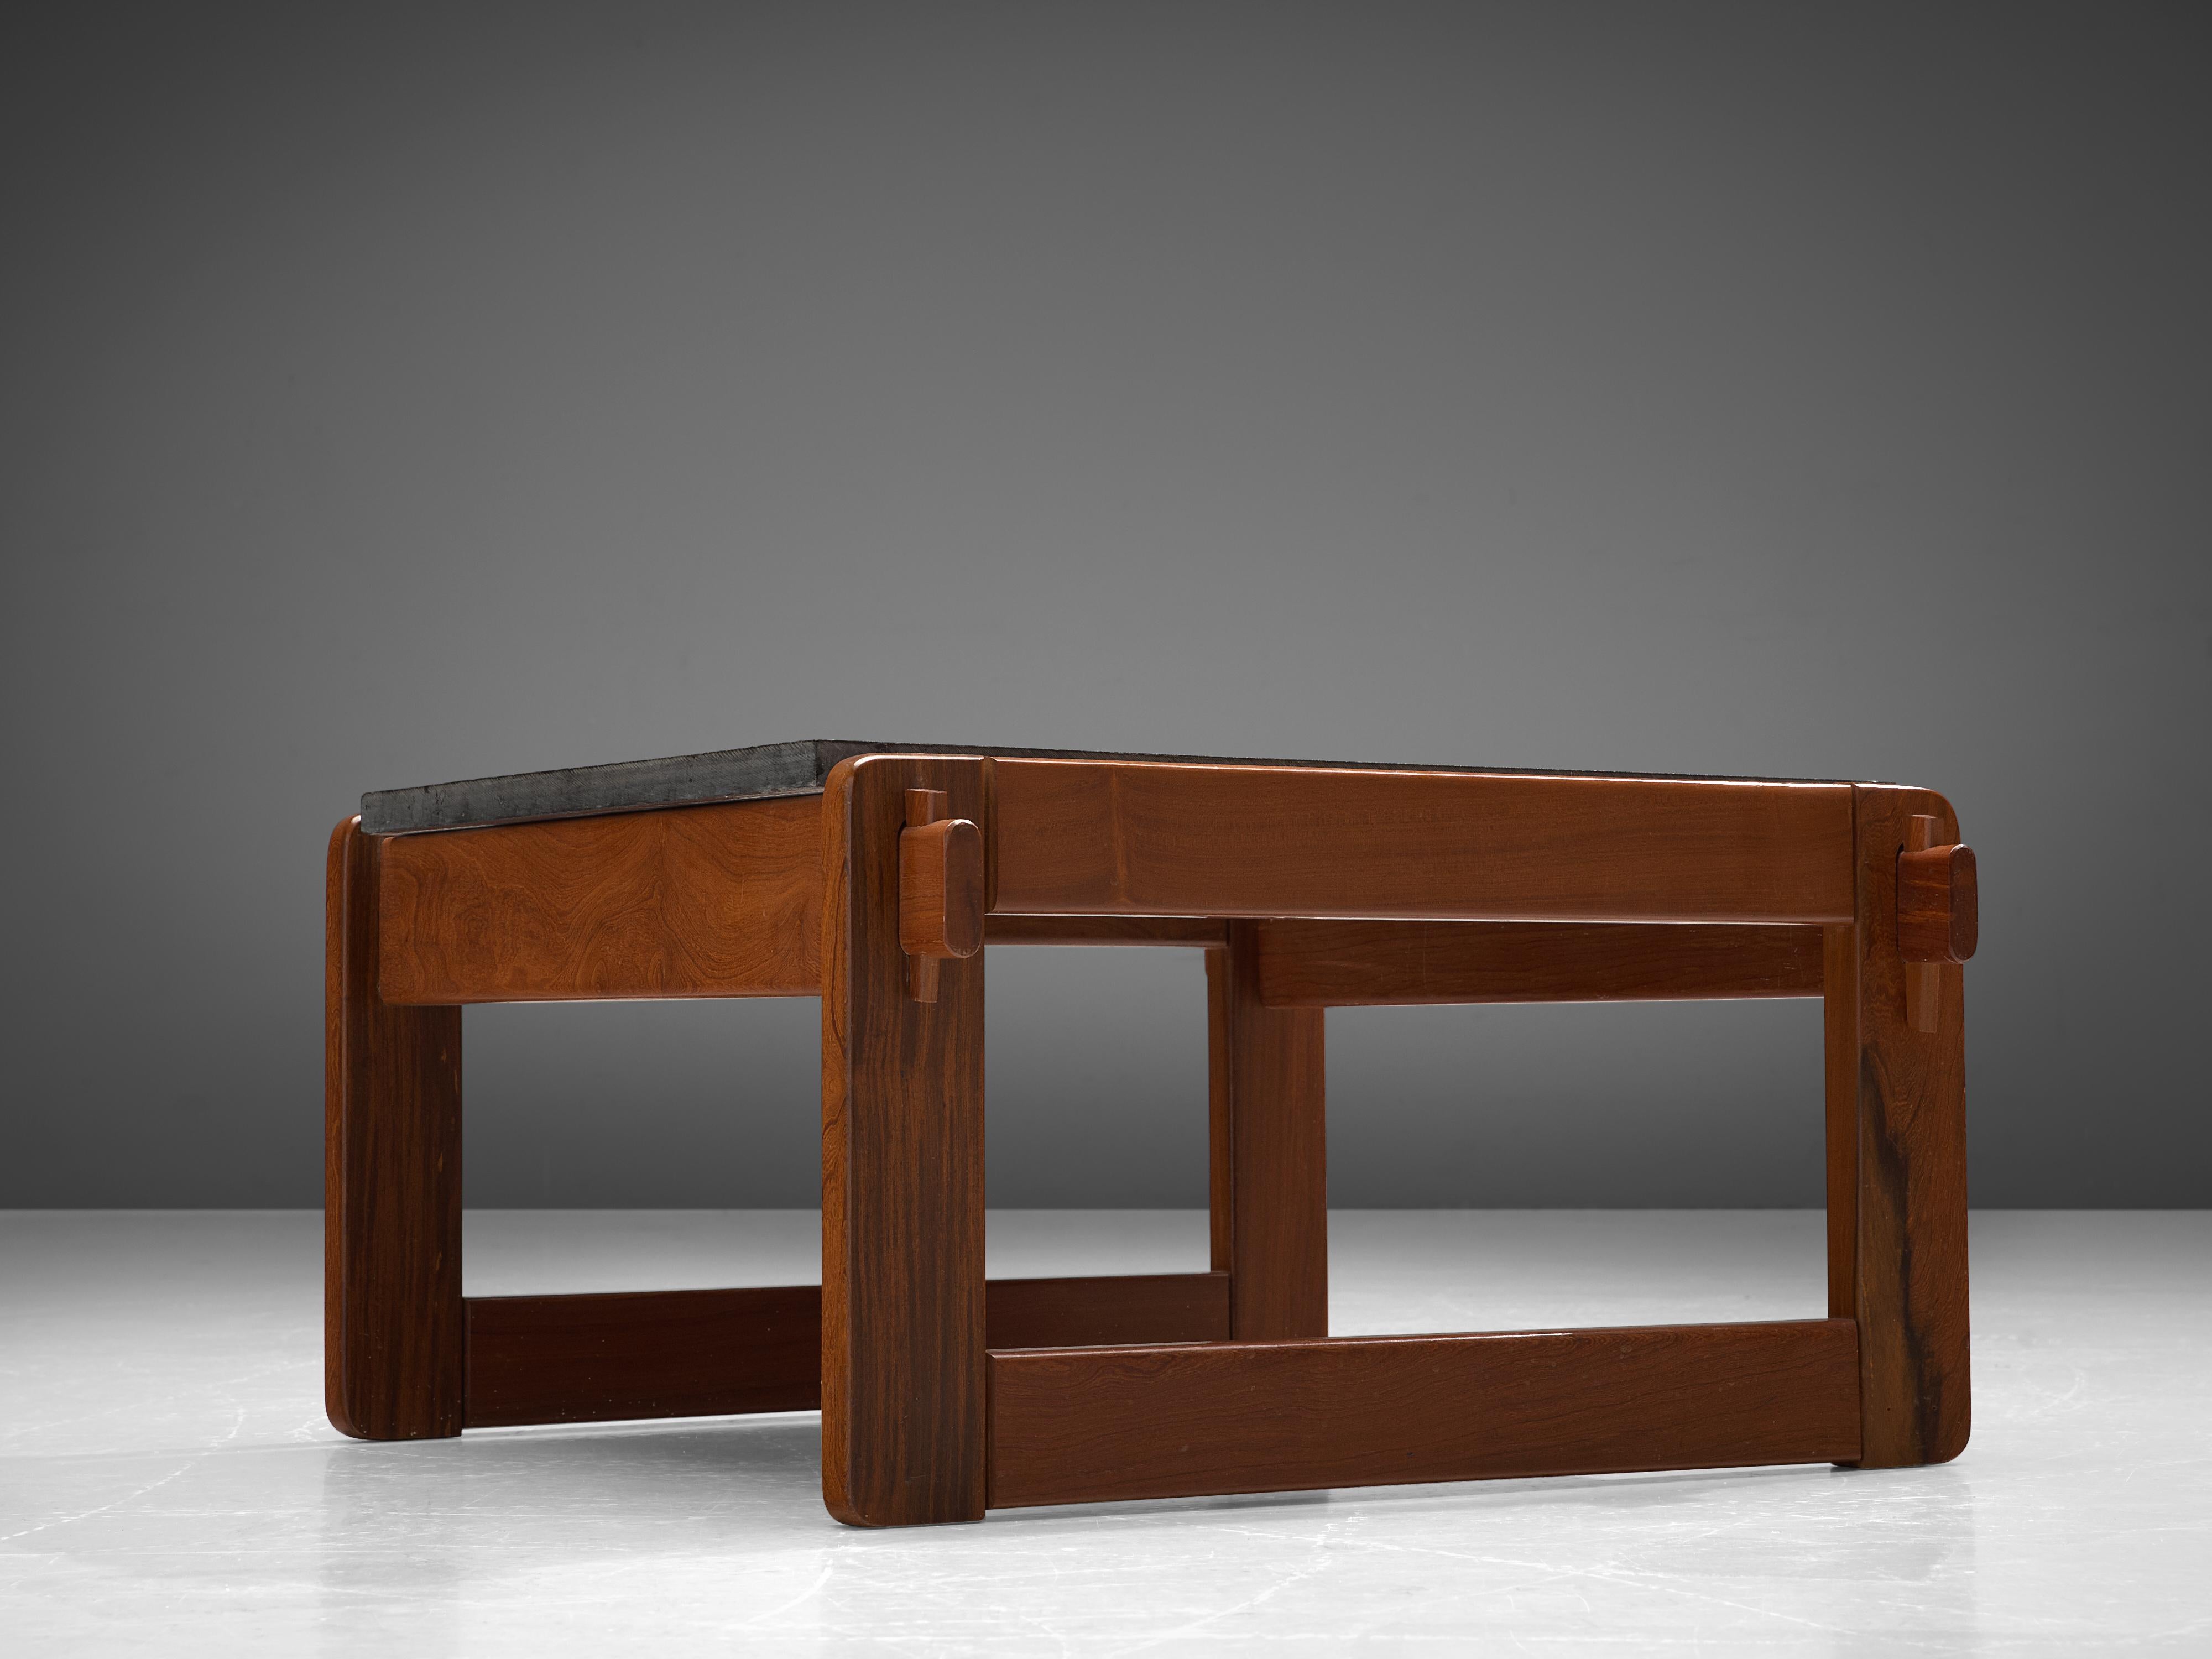 Percival Lafer, coffee or side table, slate, wood, Brazil, 1970s.

This robust and notable coffee table with a dark tabletop in slate is designed by Percival Lafer. The tables consists of a thick wooden frame of which the wooden joints are clearly